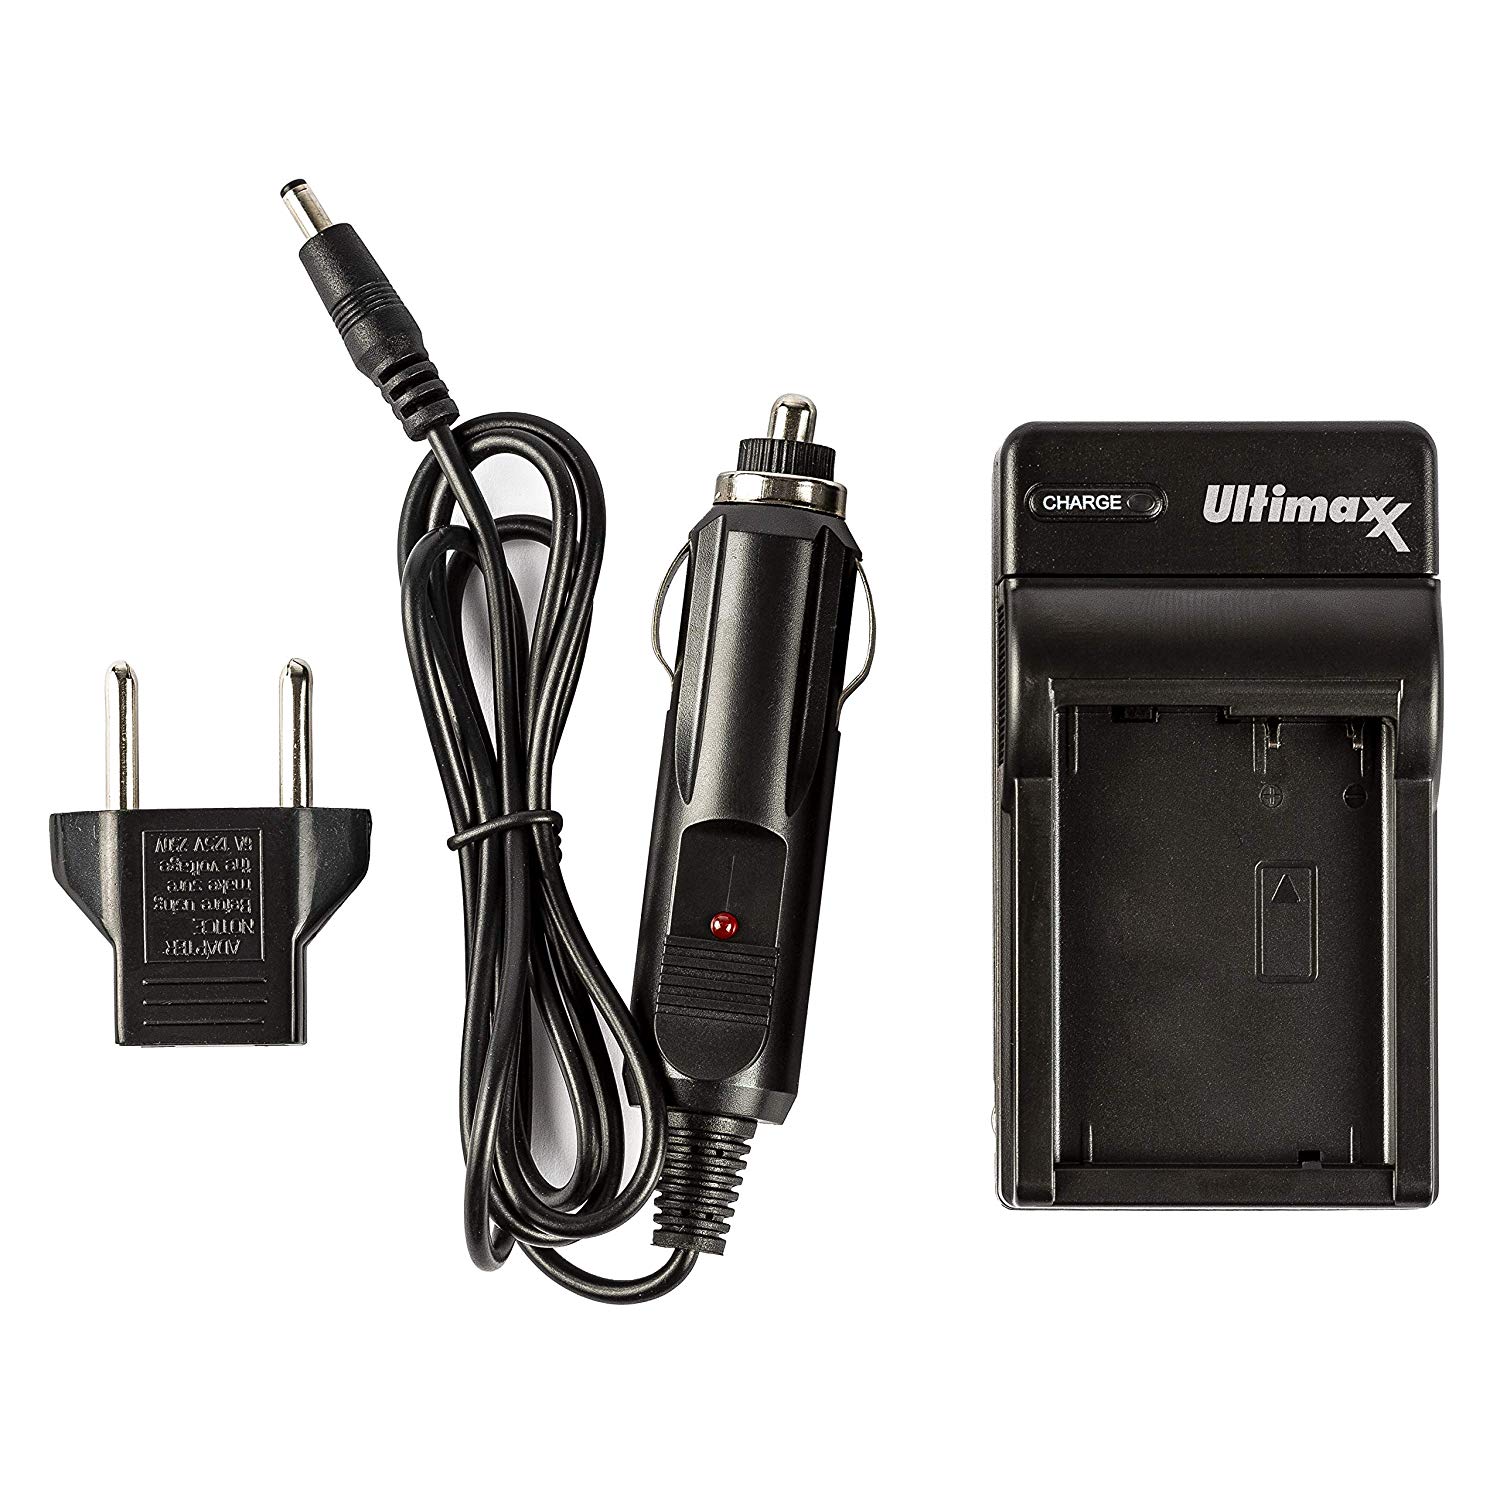 Ultimaxx AC/DC Rapid Home & Travel Charger for DMW-BLC12